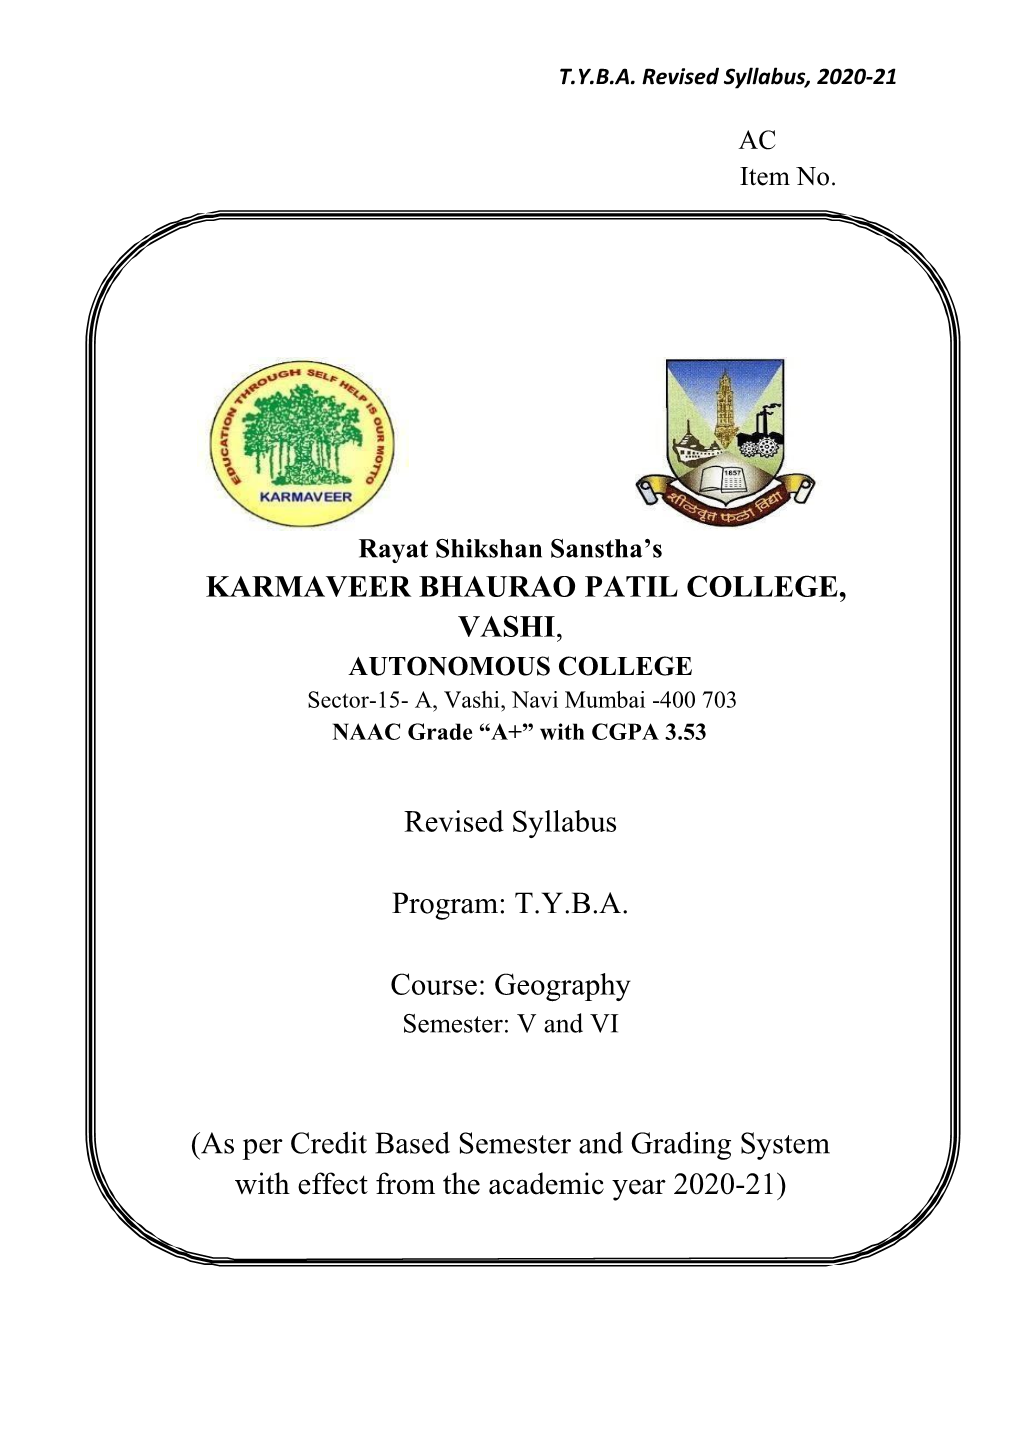 TYBA Course: Geography (As Per Credit Based Semester and G